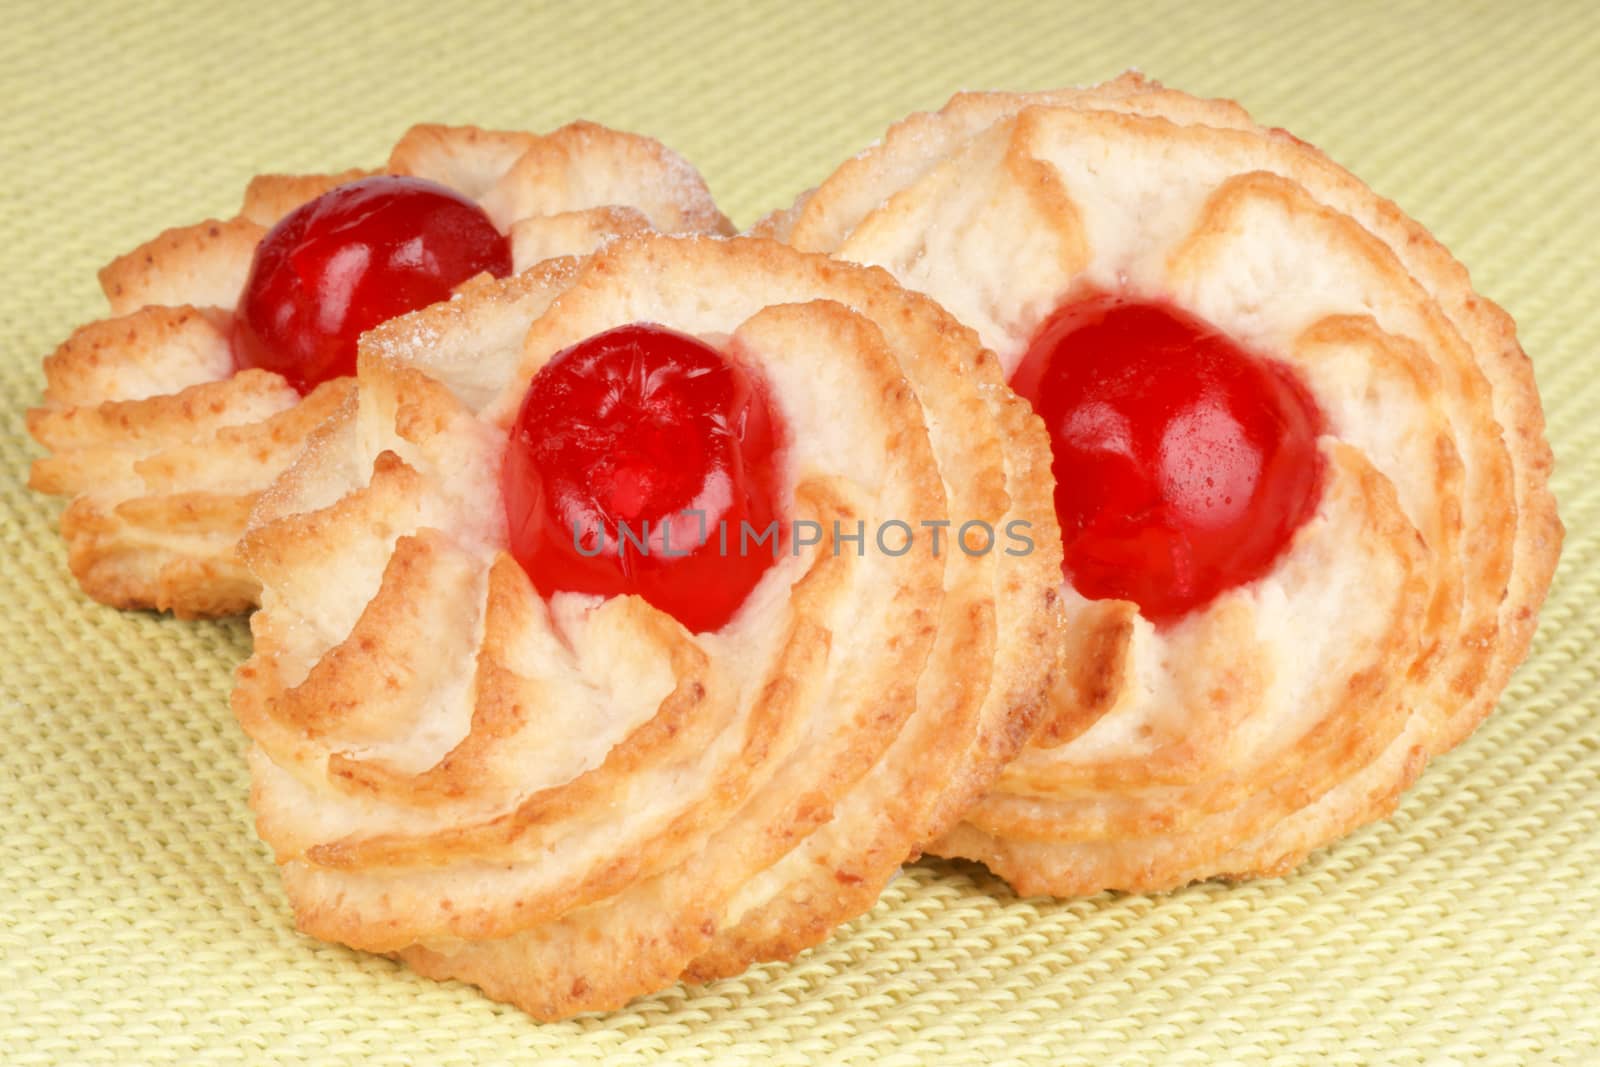 Three almond pastries decorated with red candied cherries over a light green fabric background